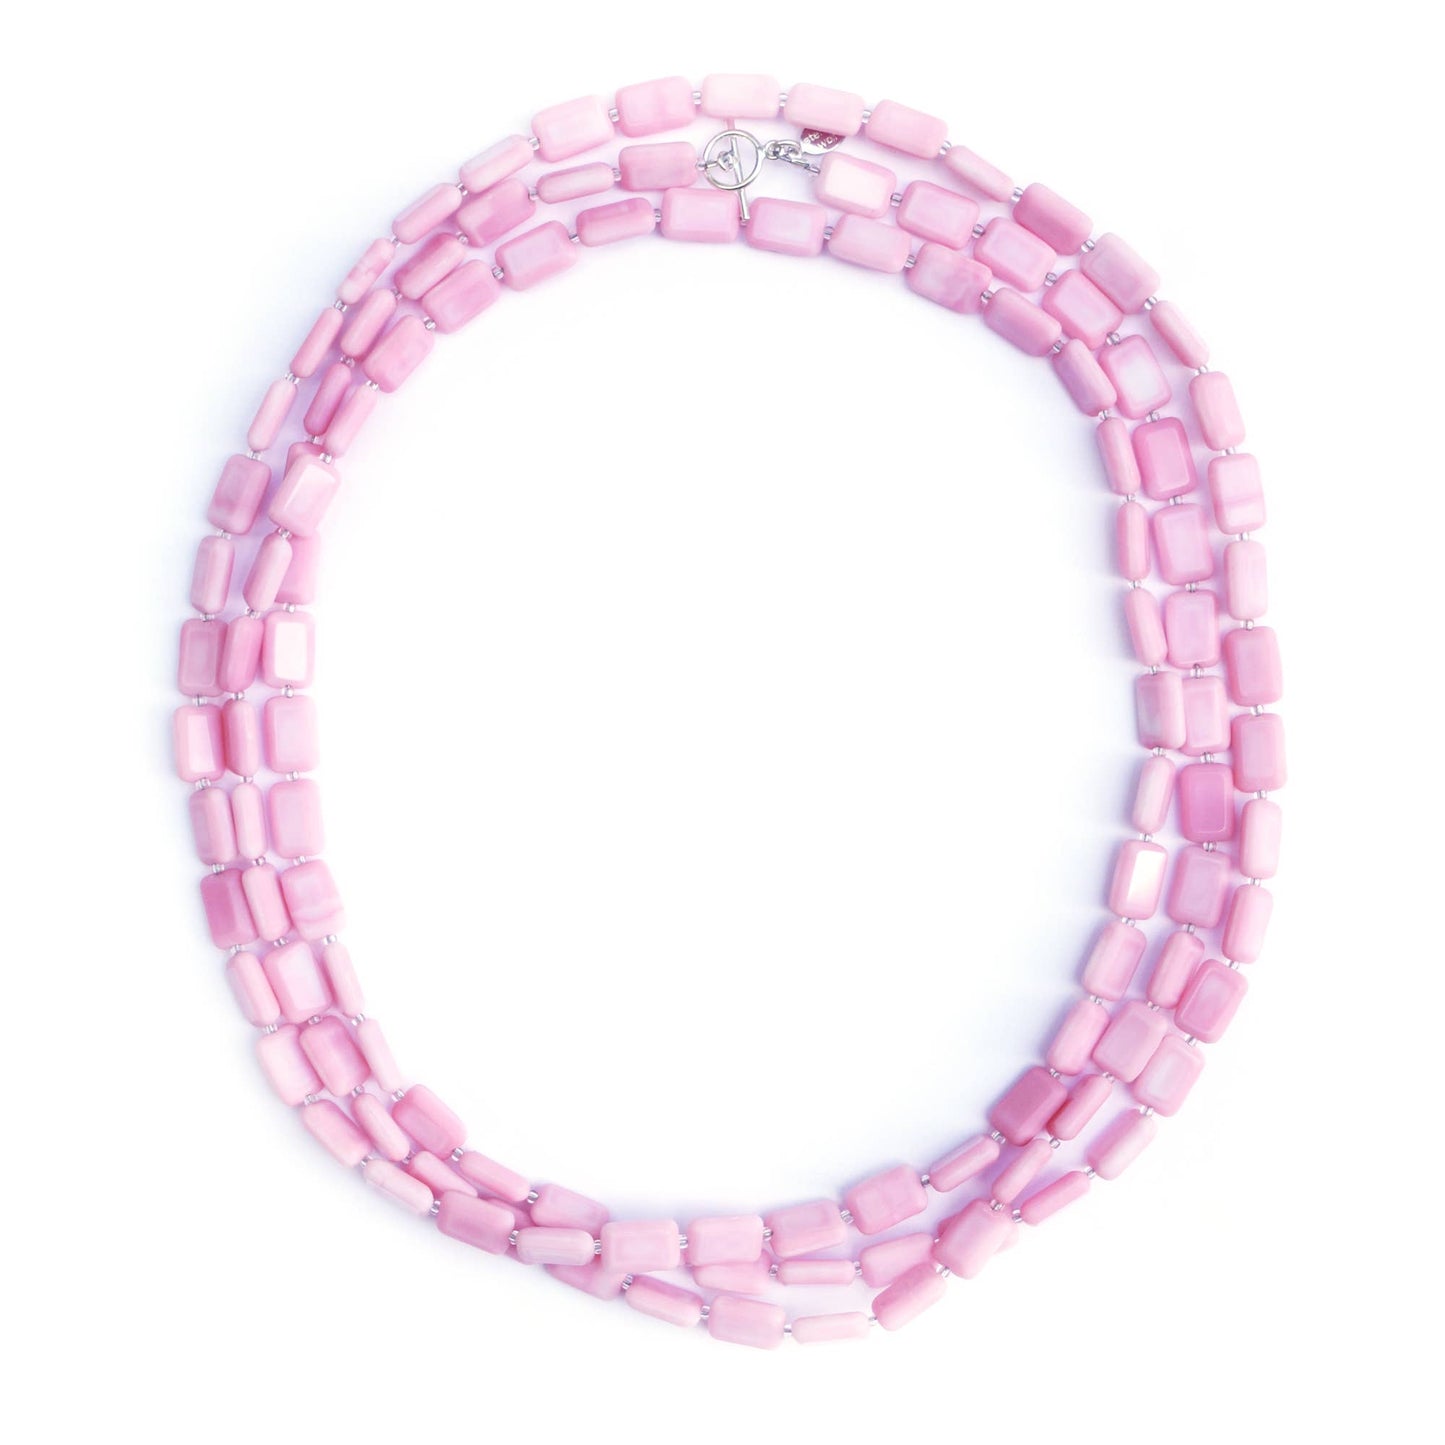 7 way 60" Necklace, Trilogy, in Perfect Pink